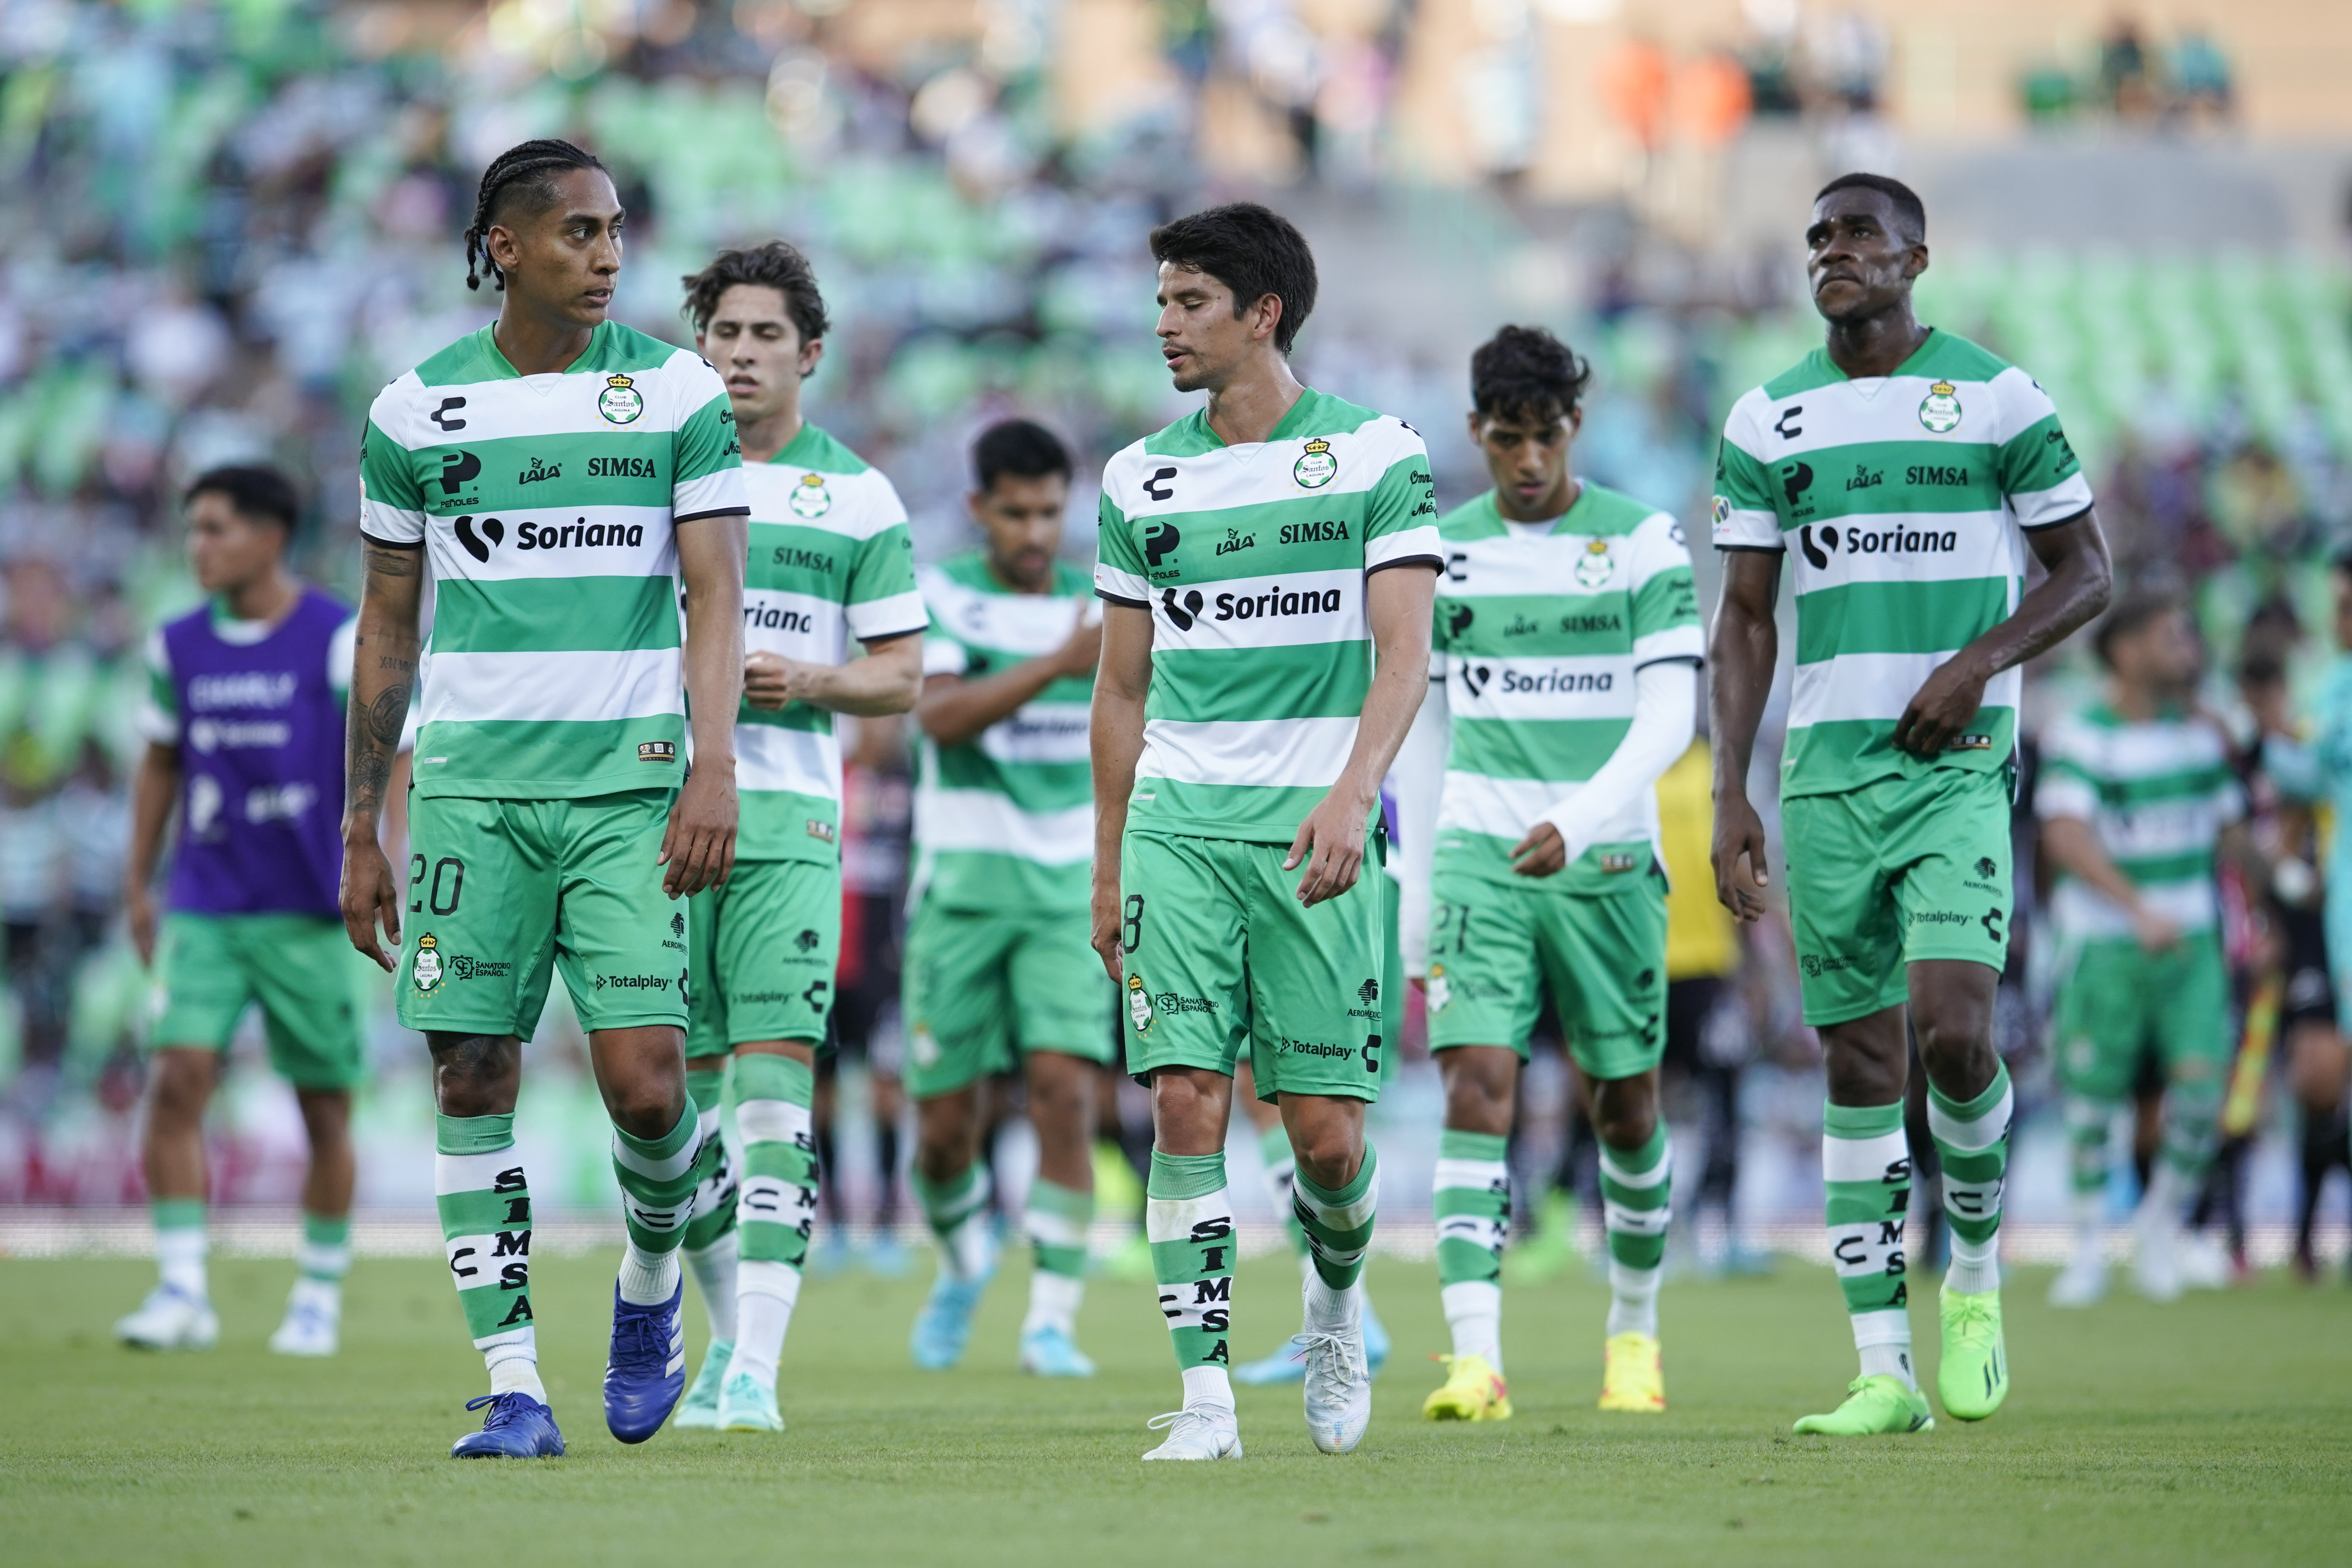 Players of Santos walk at halftime during the 6th round match between Santos Laguna and Atlas as part of the Torneo Apertura 2022 Liga MX at Corona Stadium on July 31, 2022 in Torreon, Mexico.